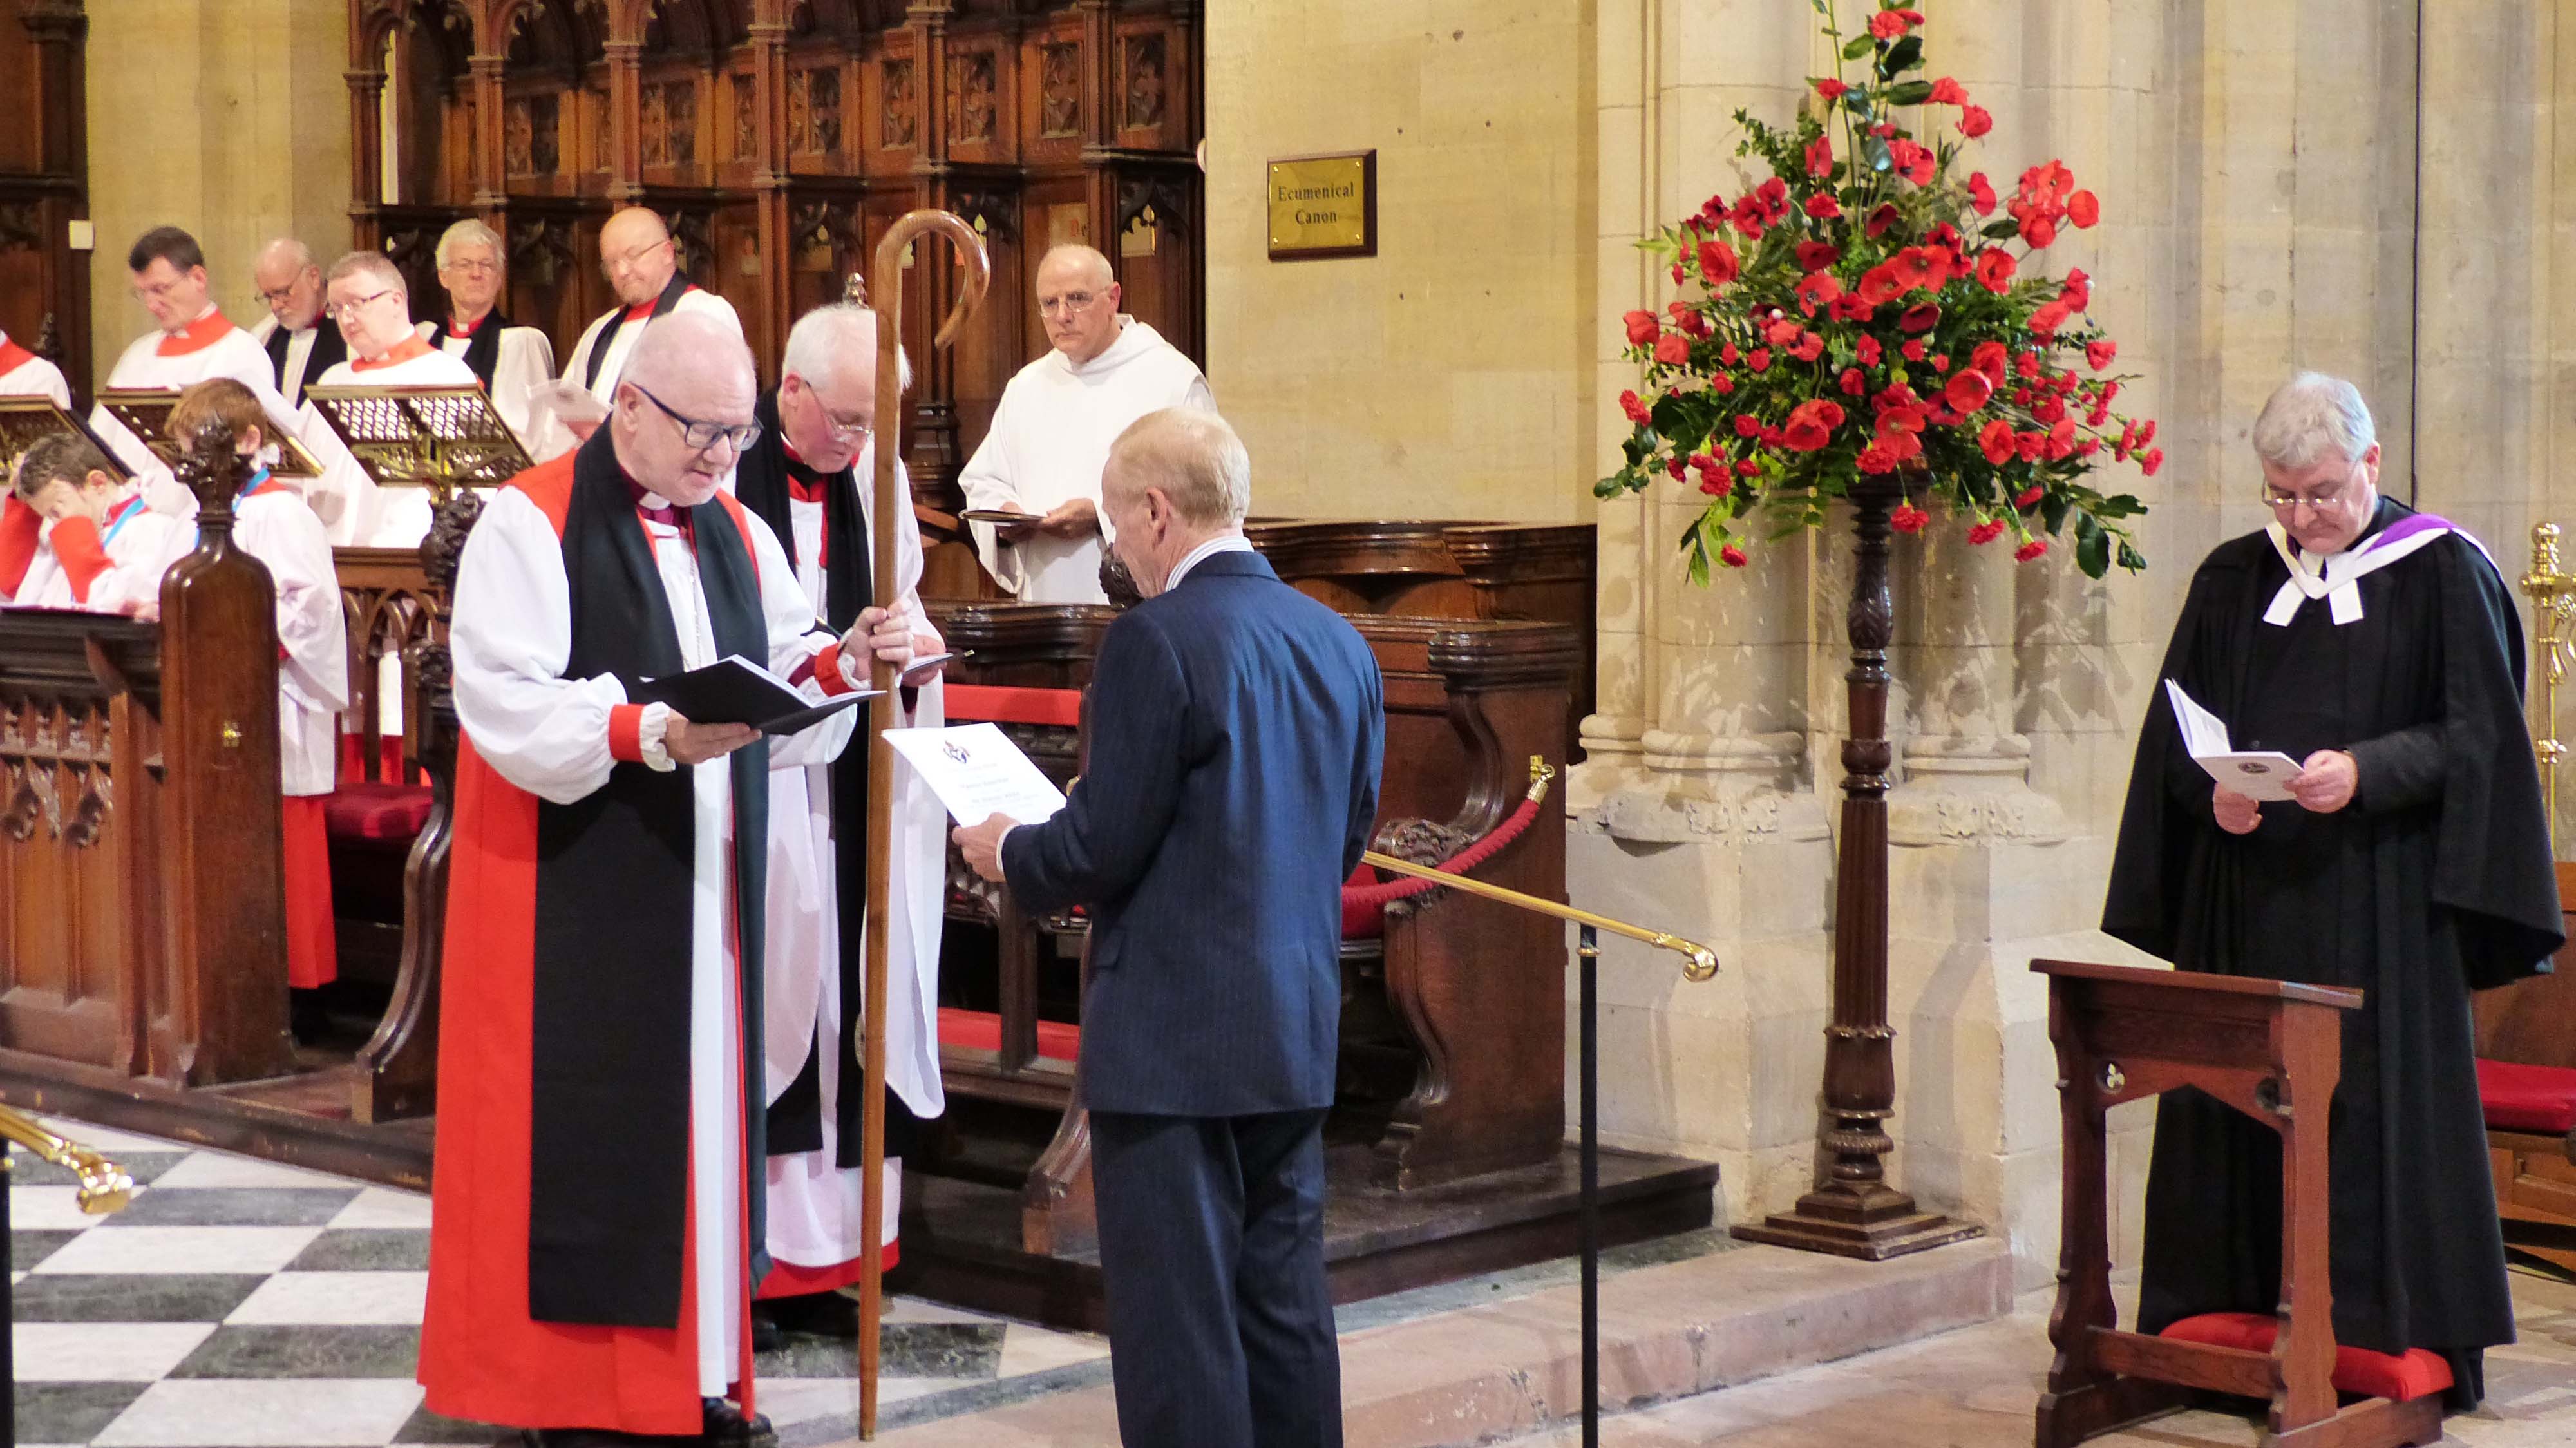 The conferral of the title of Organist Emeritus on Lay Canon Martin White.